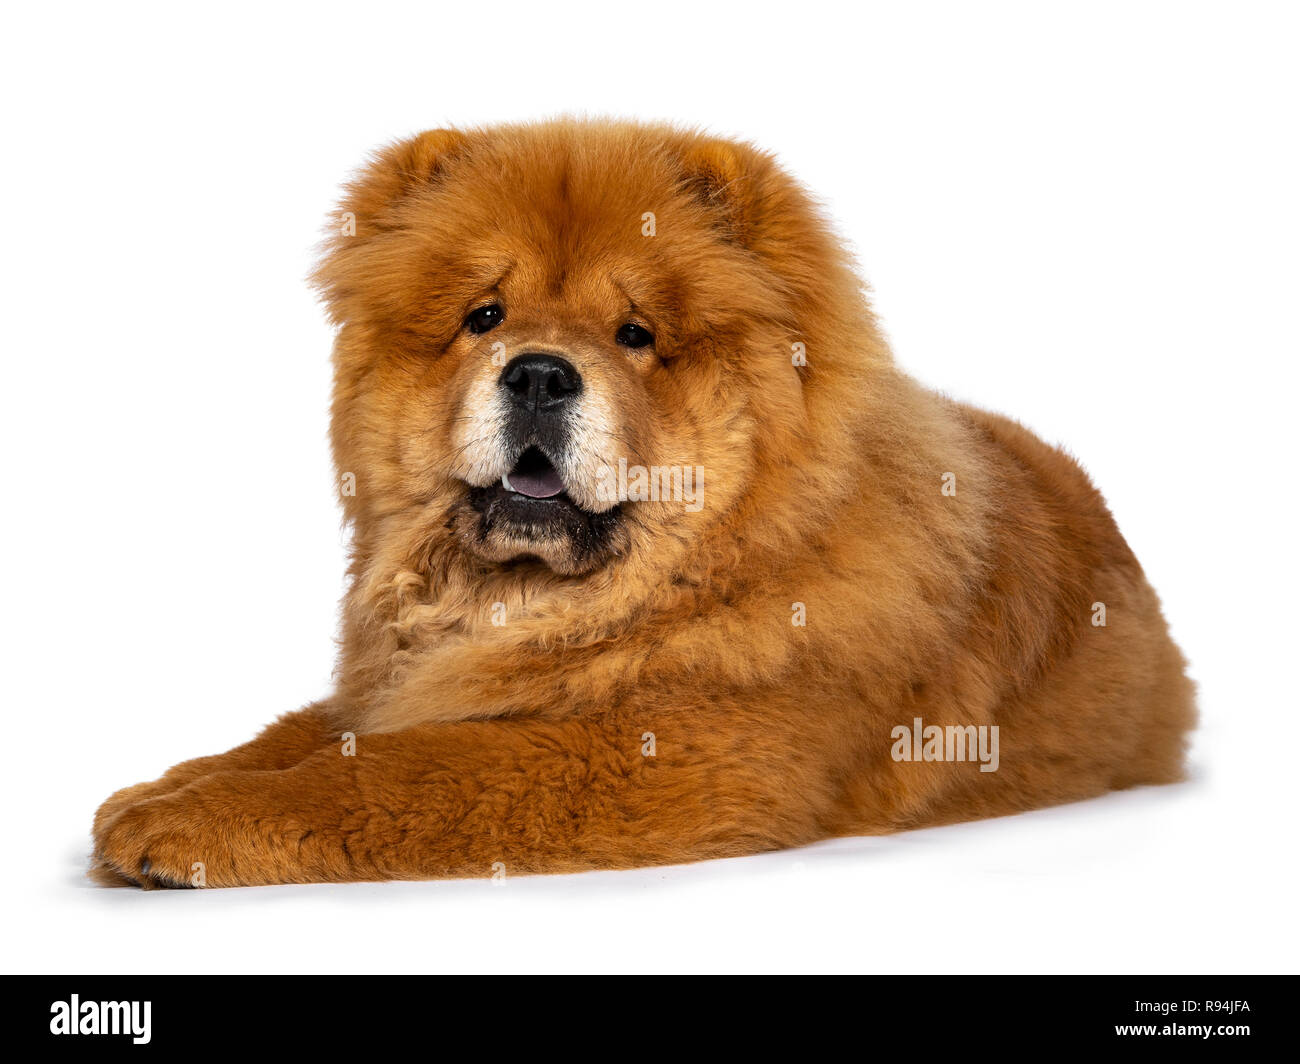 Cute fluffy Chow Chow pup dog, laying down half side ways looking at camera. Isolated on a white background. Mouth open, showing blue tongue. Stock Photo